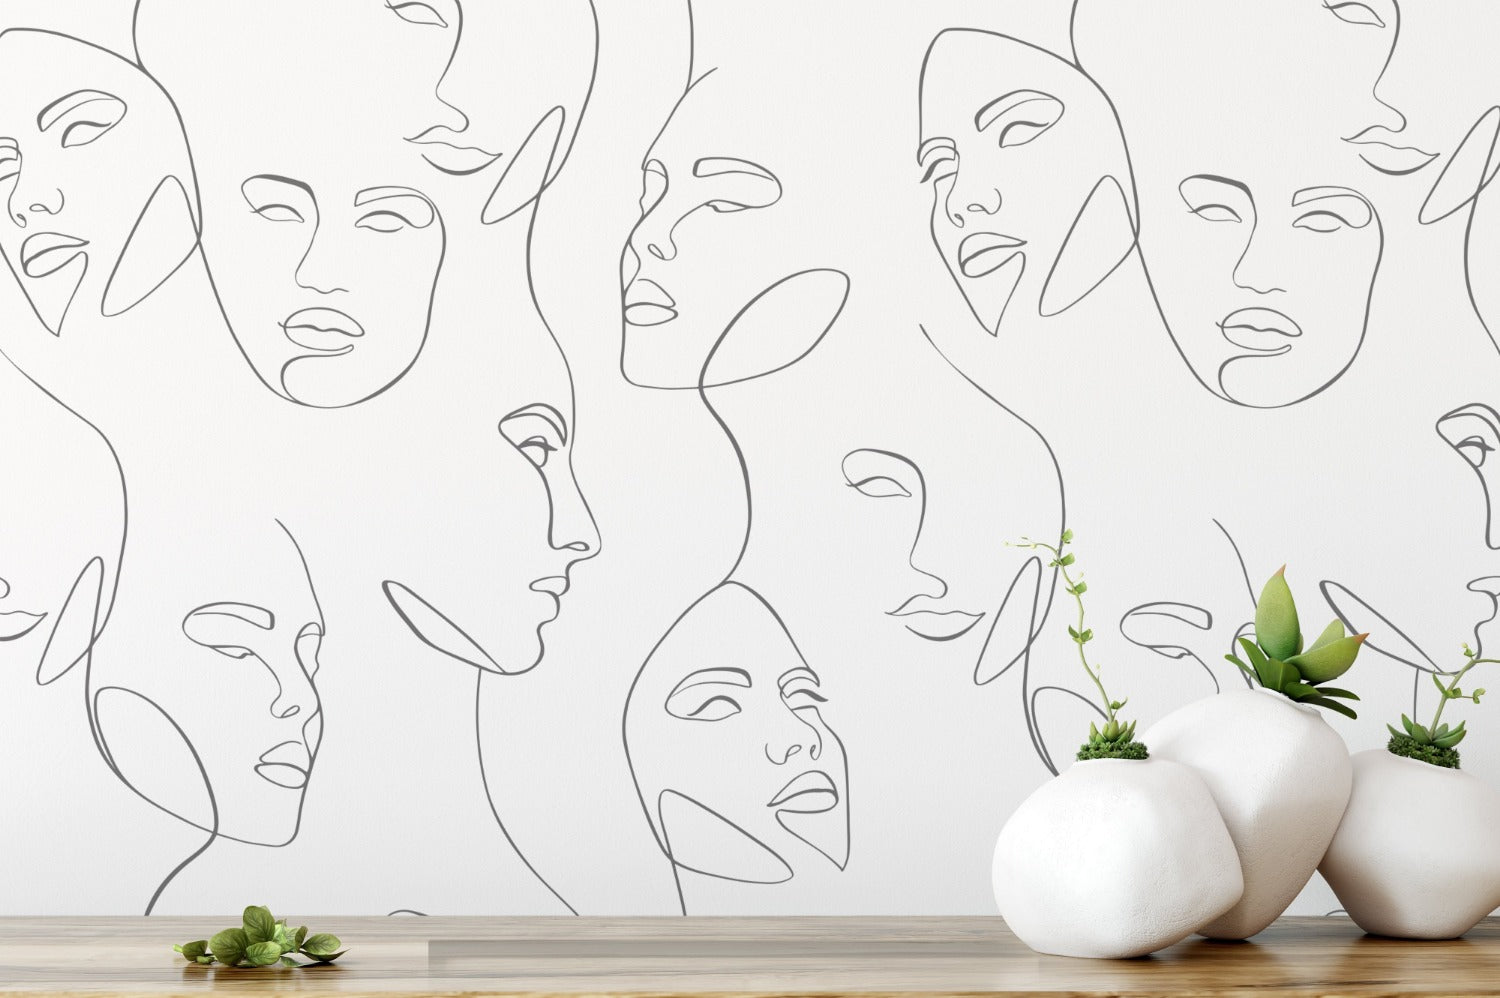 The Abstract and Minimal Wallpaper - Line Art III features a continuous line drawing of serene faces in black on a white background. A wooden surface with simplistic white vases holding green plants adds a natural touch to the modern aesthetic